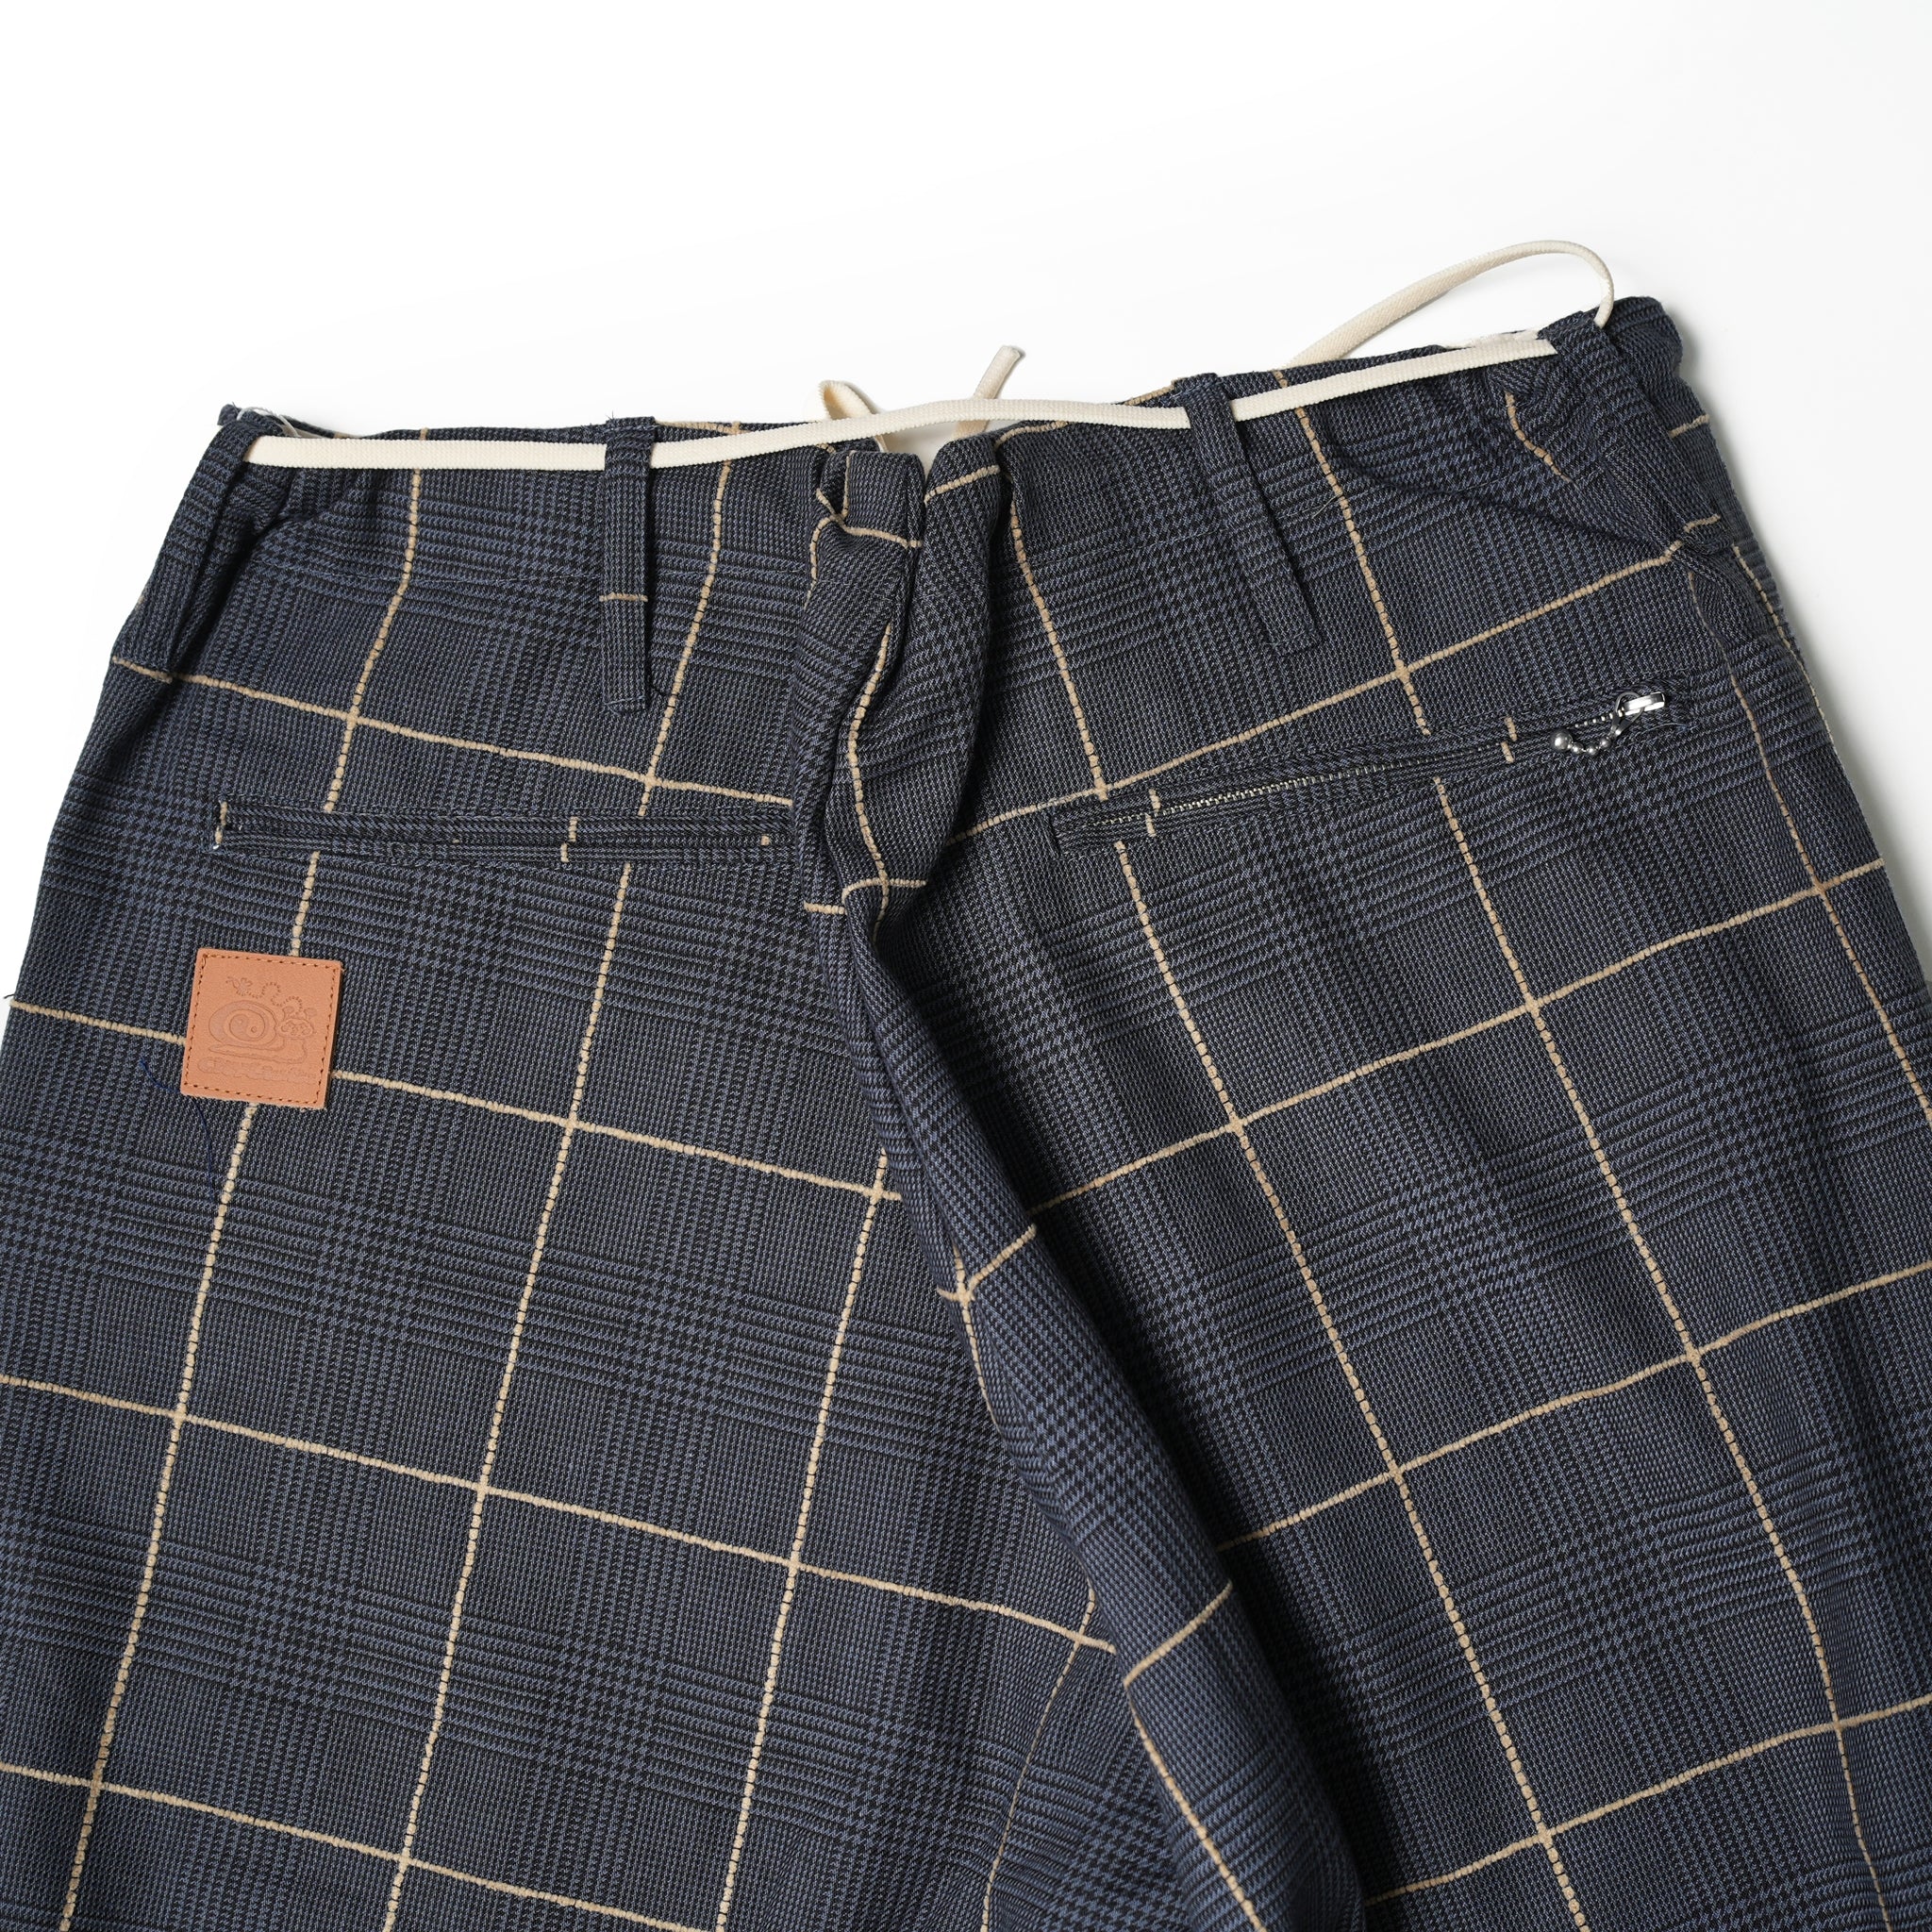 Name: Non-Elastic E-Z Pants Dead Stock Fabric Collection | Color:Window Pen | Size: One Fits All 【CITYLIGHTS PRODUCTS_シティライツプロダクツ】